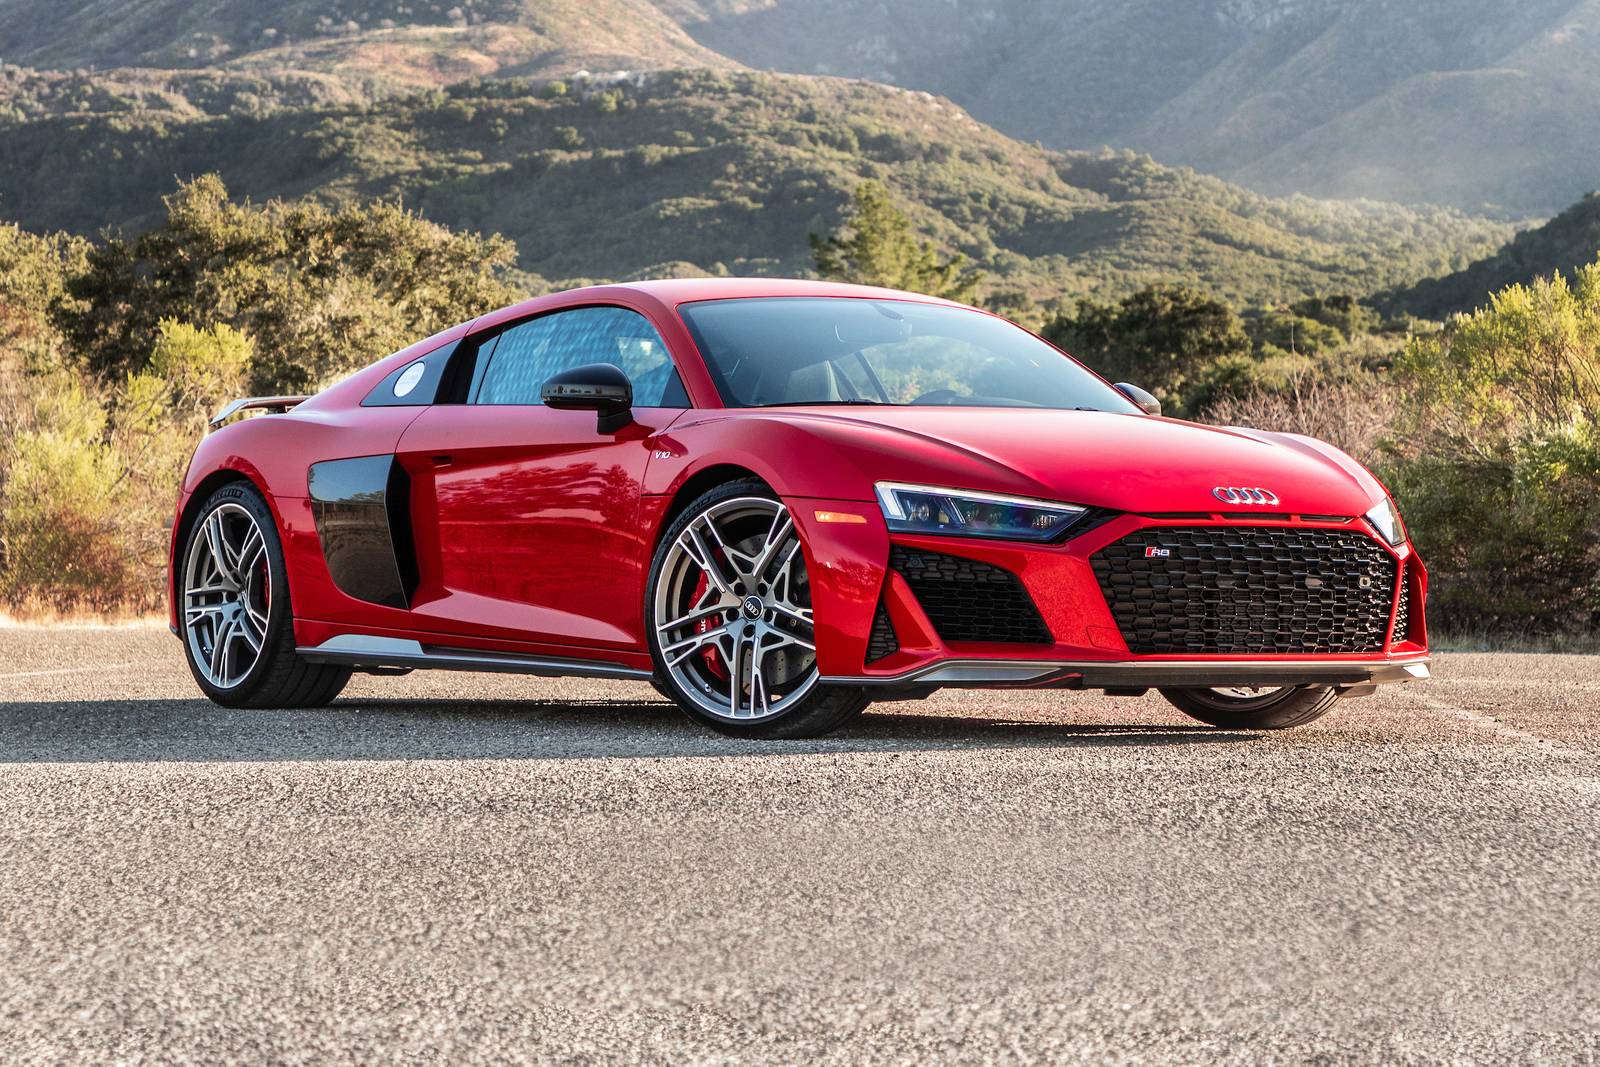 Hire A Audi R8 For A Day Price